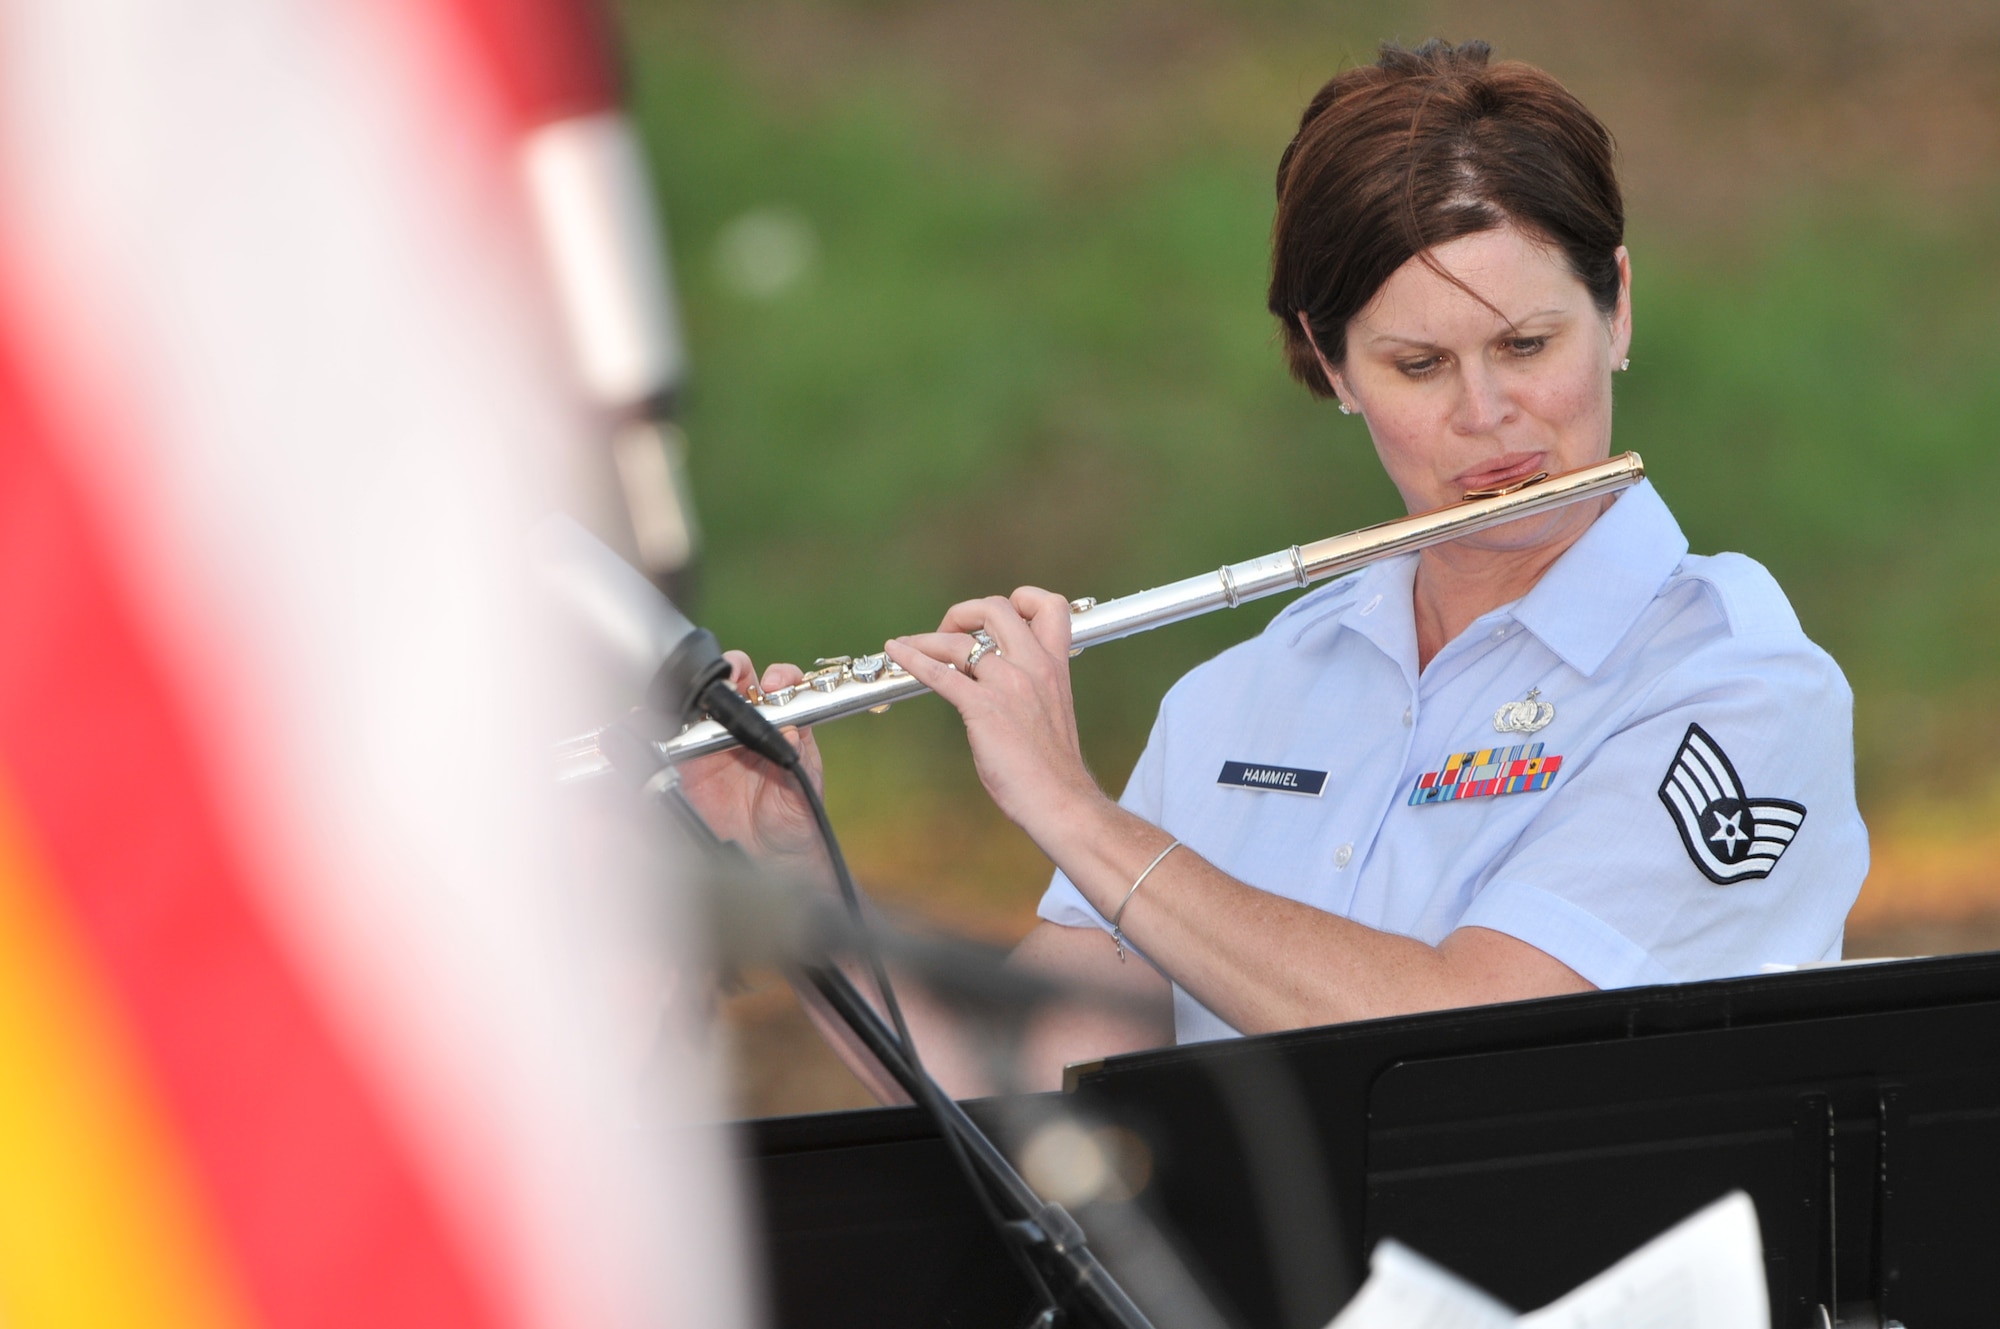 Staff Sgt. Kristi Hammiel, a musician with the Air National Guard Band of the Midwest based in Peoria, Ill plays the flute during a concert in Sioux City, Iowa on July 27, 2015. The 566th Air Force Band is performing in Sioux City as part of their summer concert series entitled “Hero’s Among Us”. As part of their two week annual training this year, the band is performing primarily in Iowa and South Dakota.
U.S. Air National Guard Photo by: Technical Sgt. William Wiseman/Released
